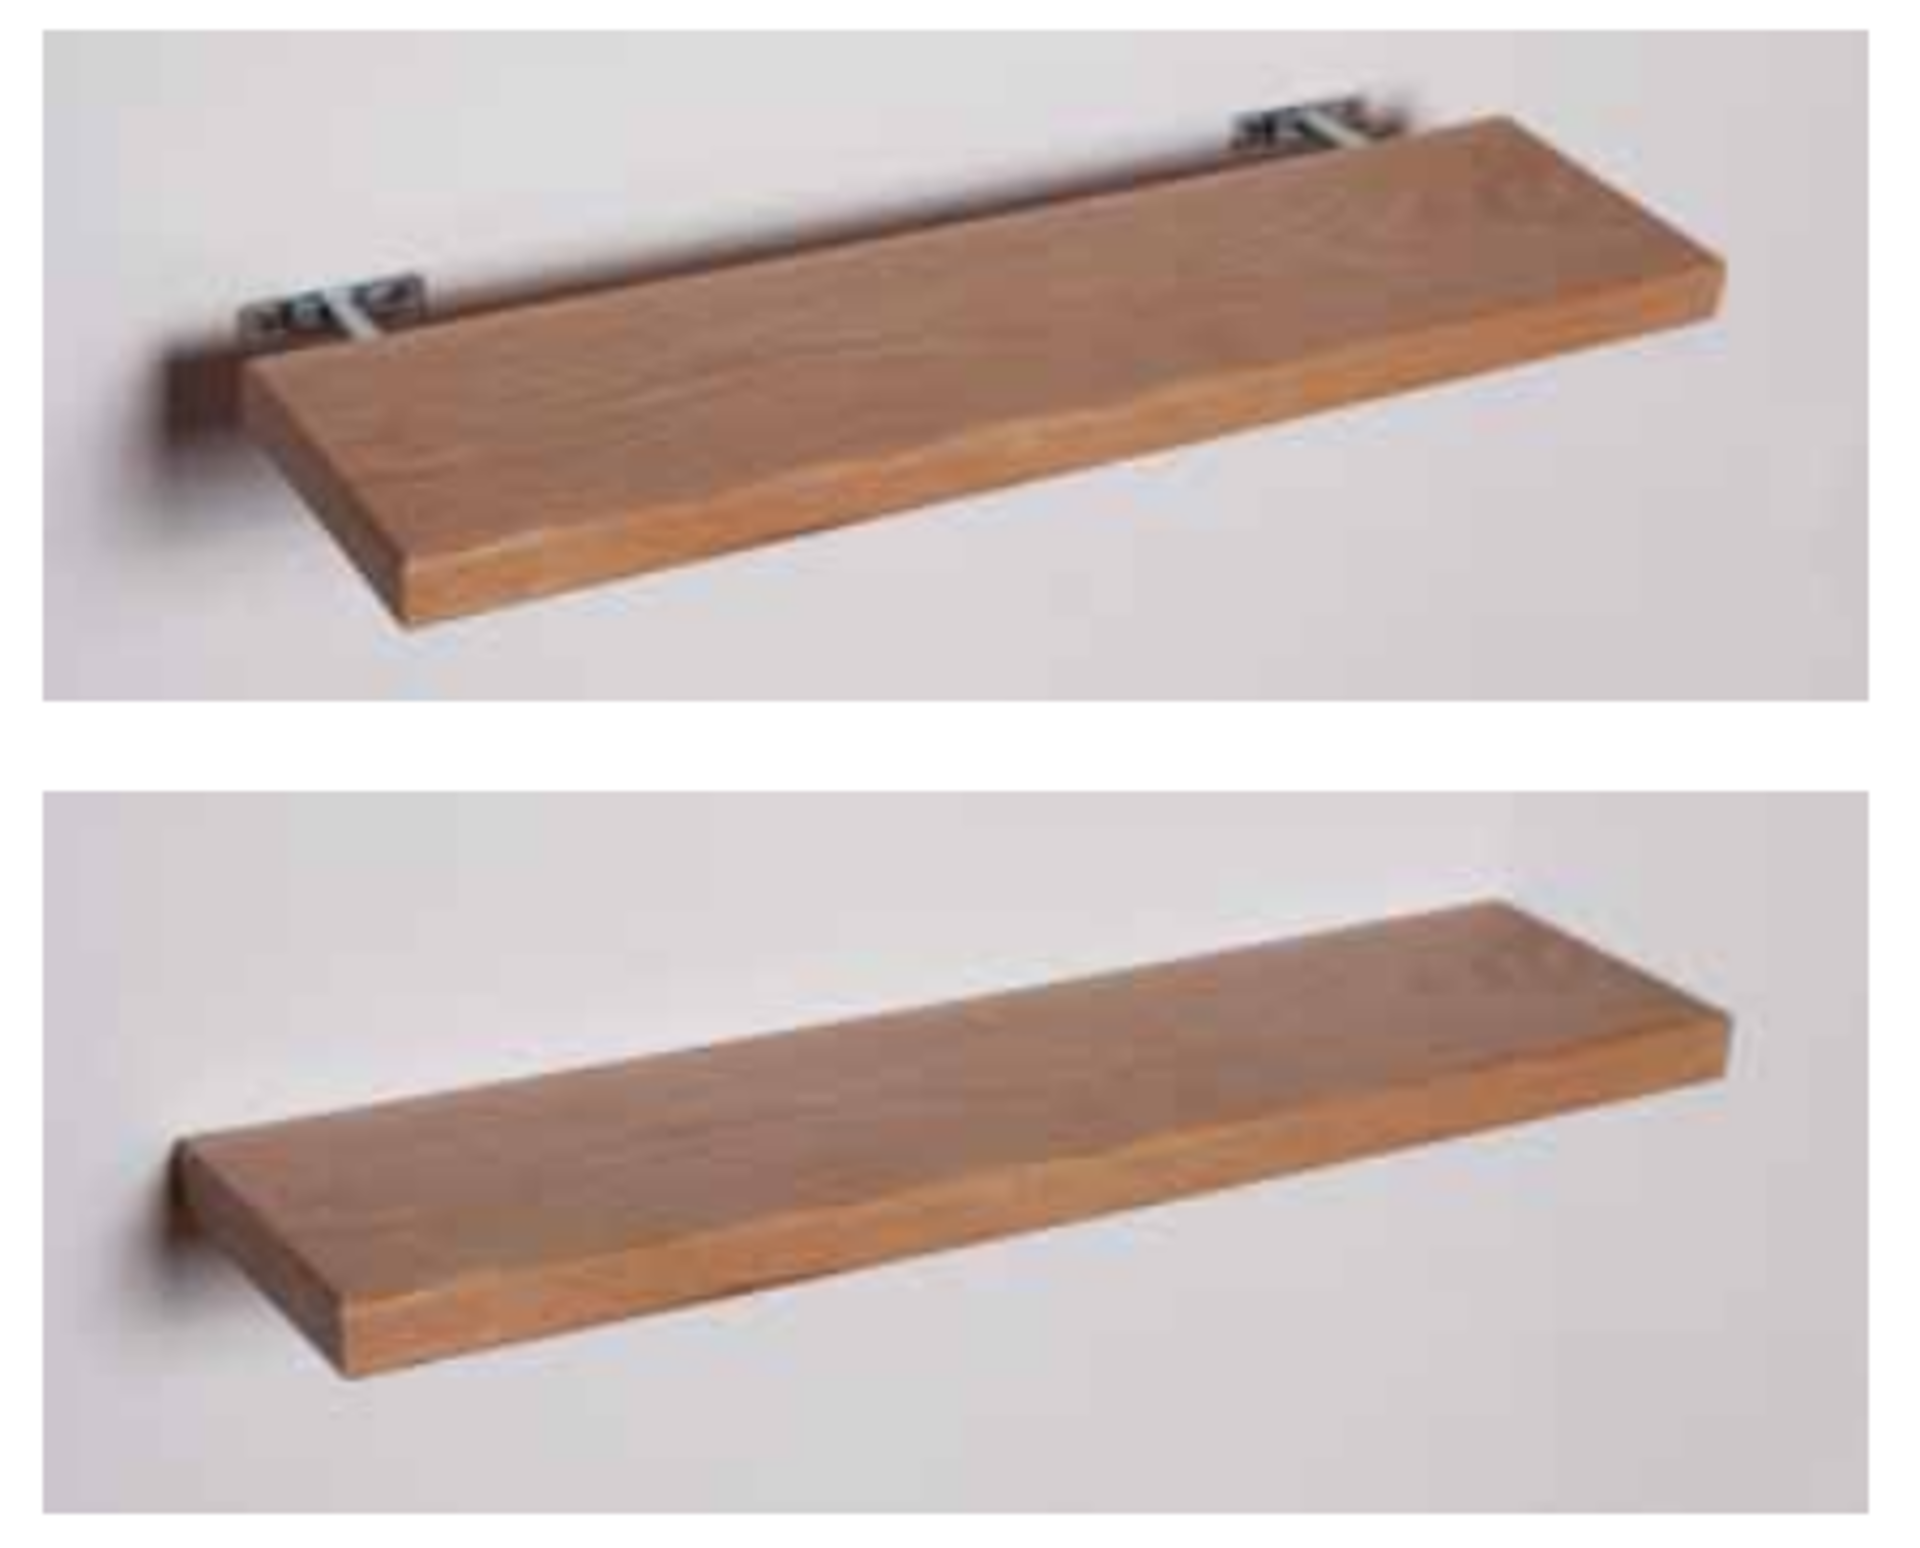 1 x Stonearth Small Bathroom Storage Shelf With Concealed Brackets - American Solid WALNUT - Image 2 of 13